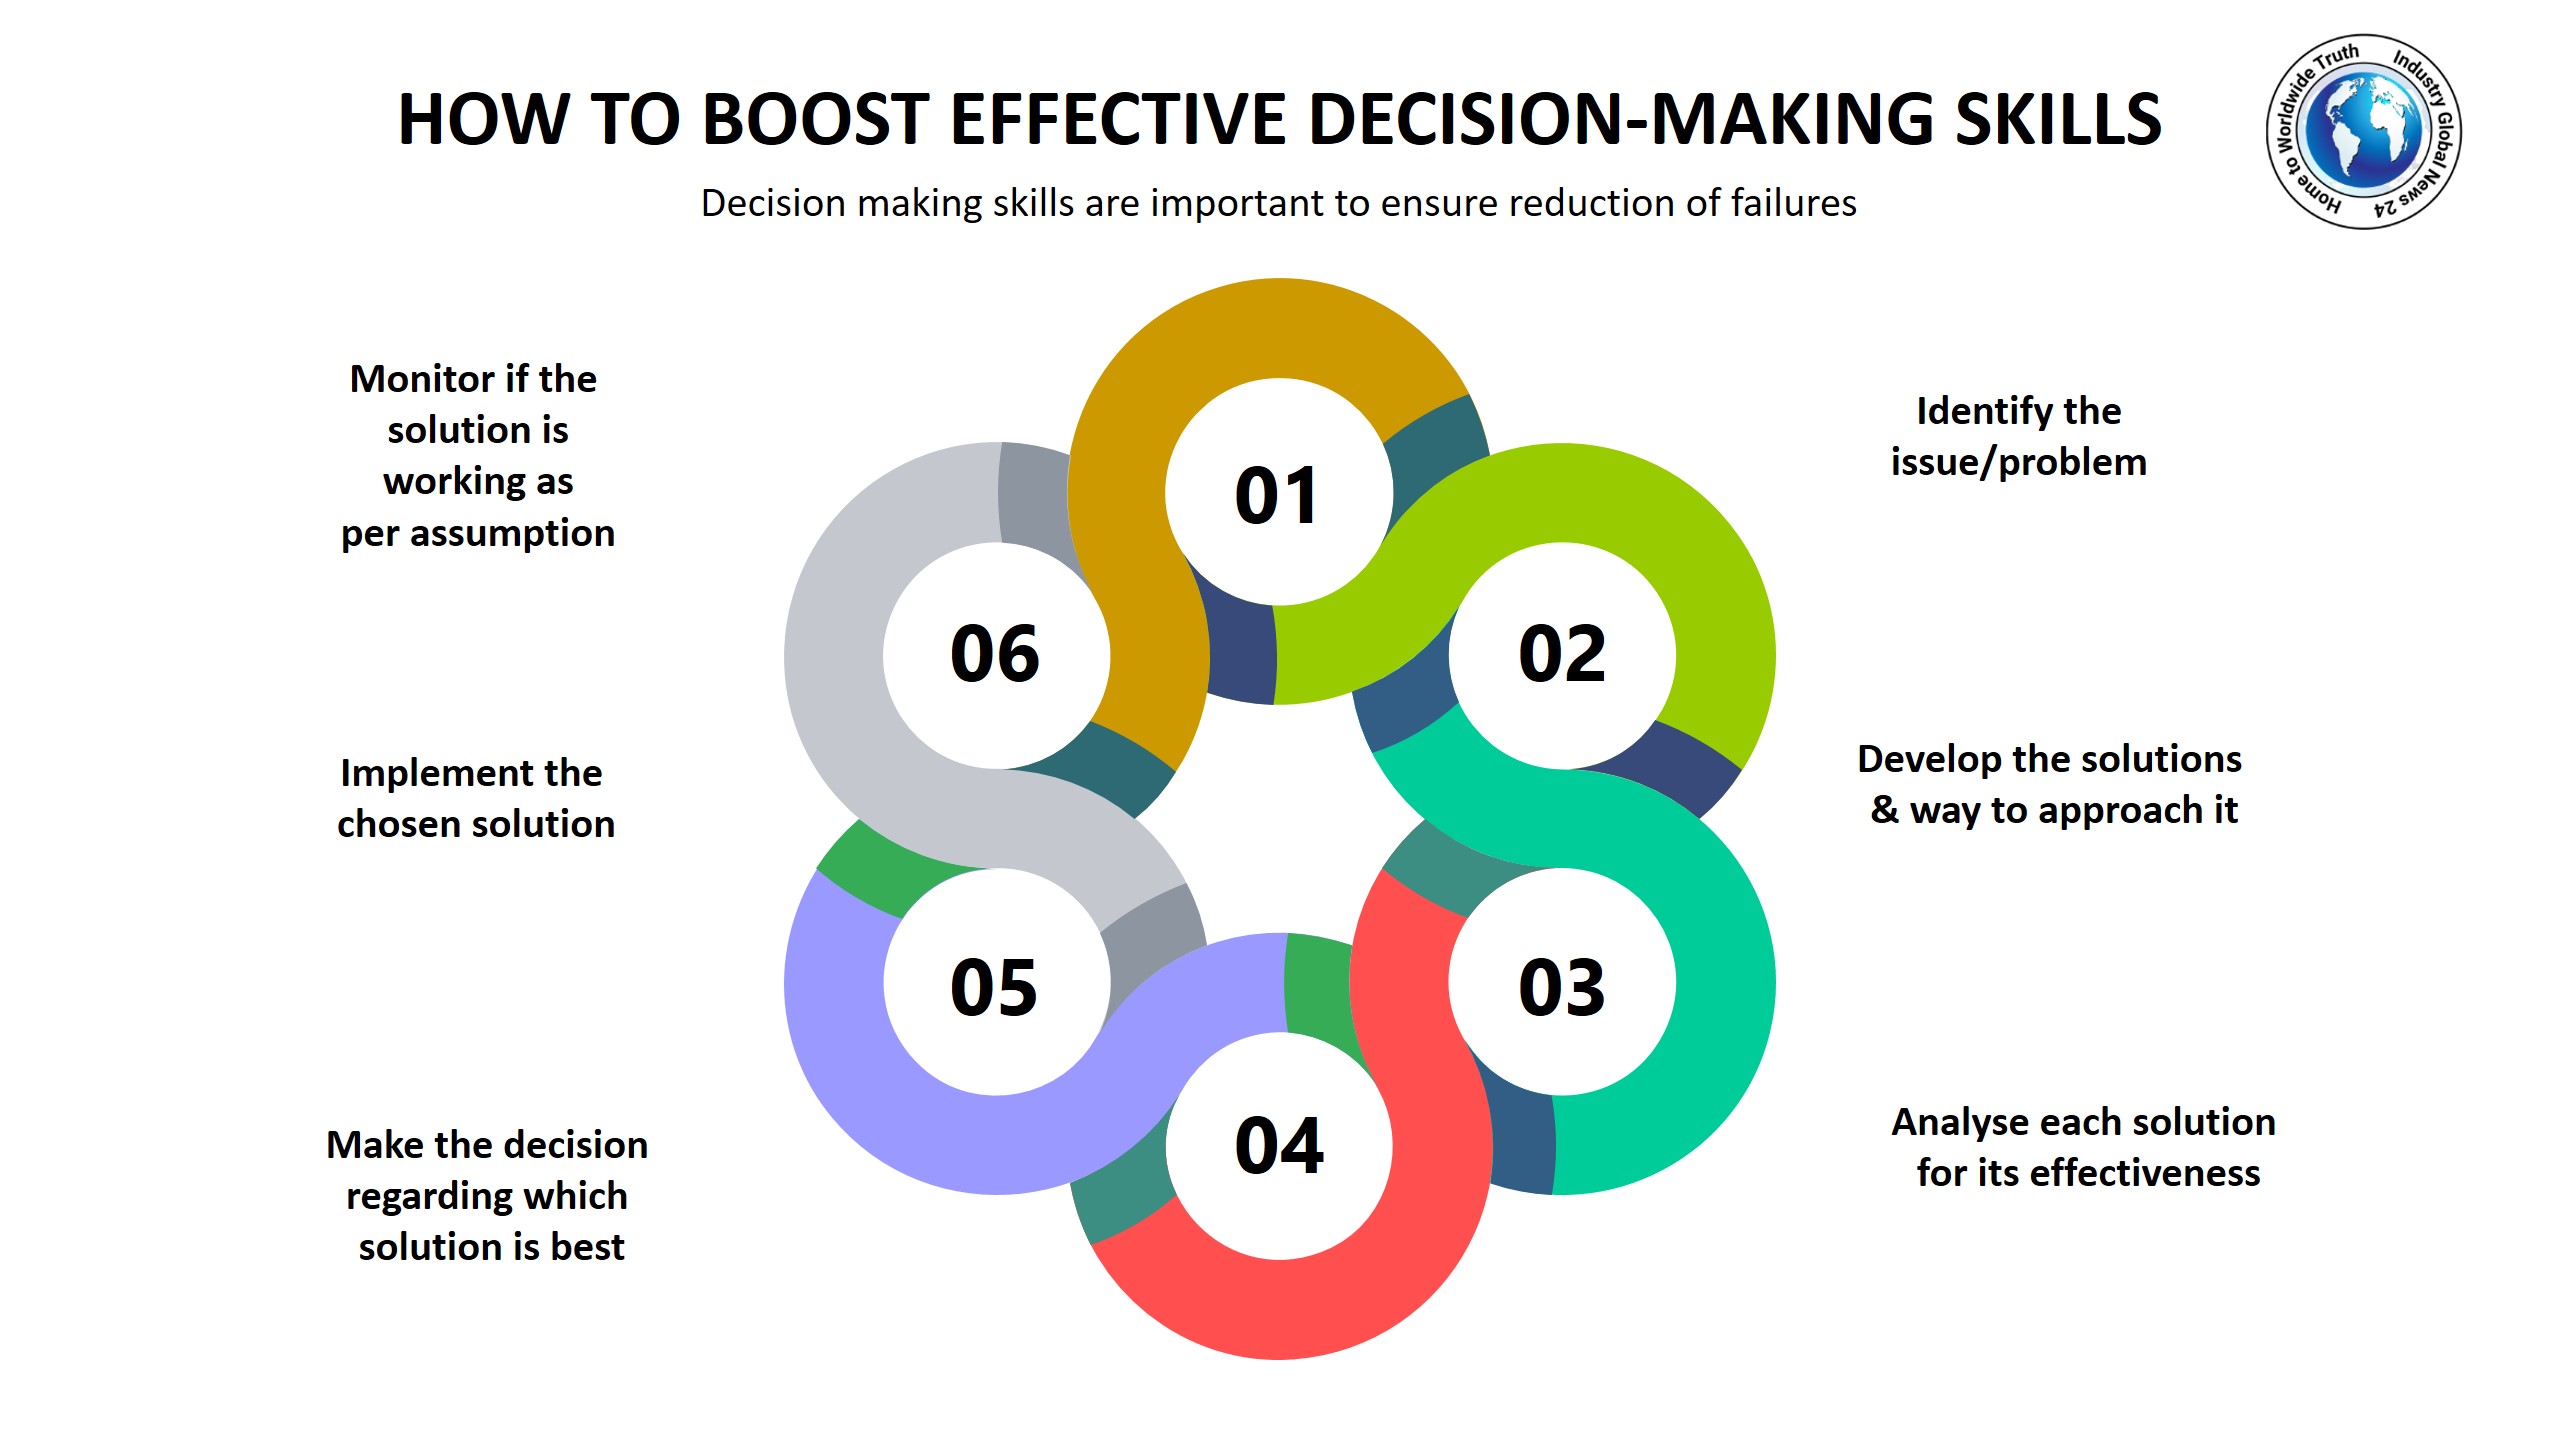 How to boost effective decision-making skills